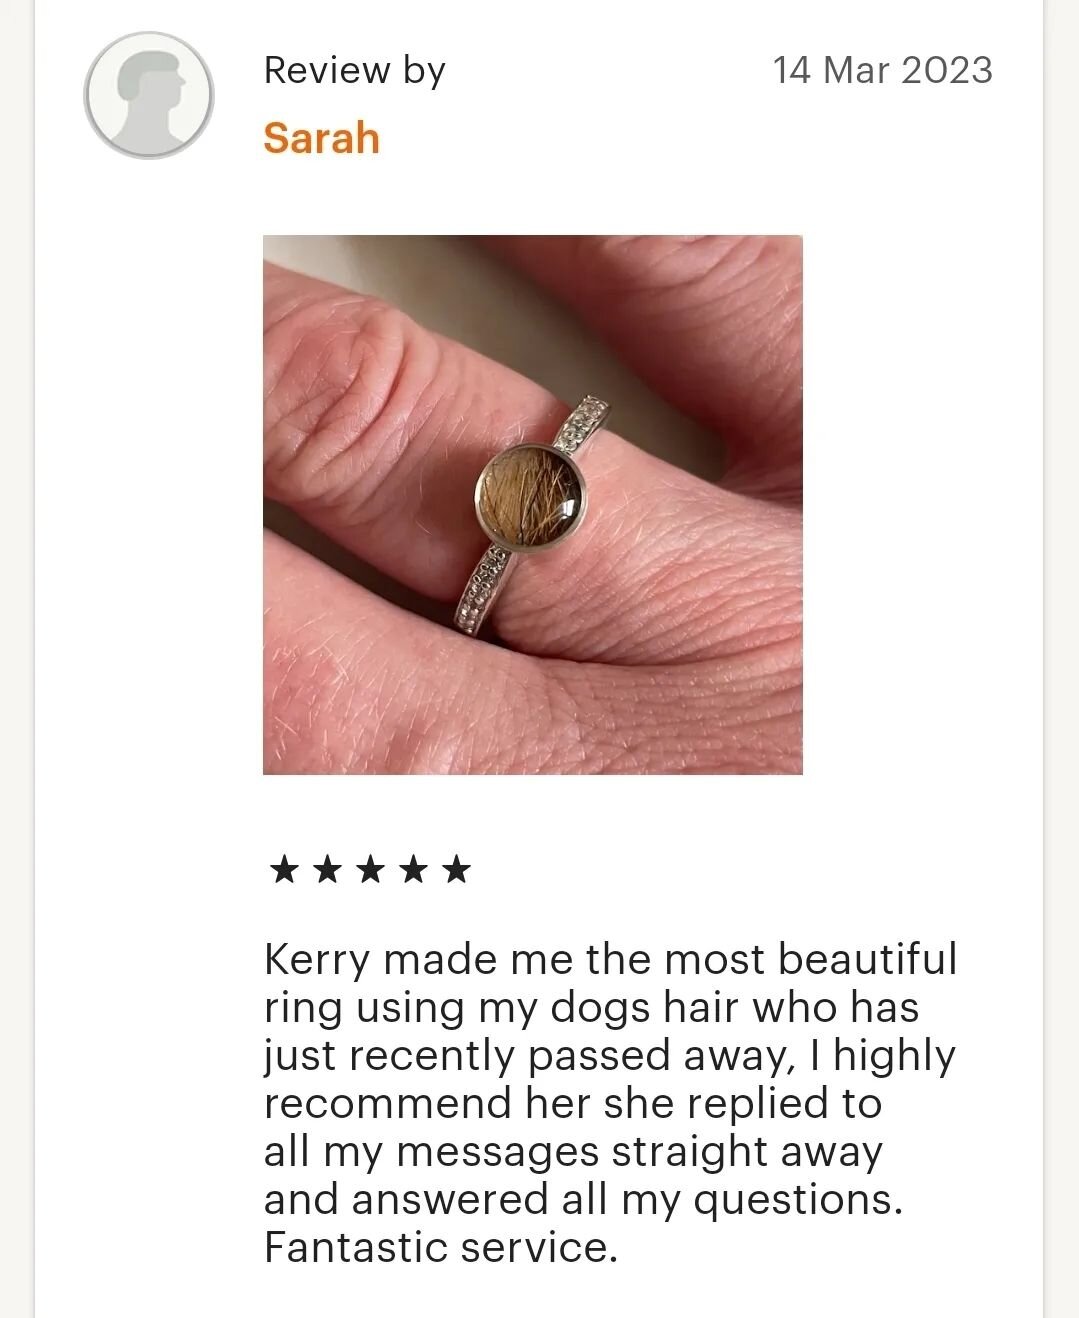 Reviews like these just make my day. It's always a privilege to make your memorial jewellery so you can keep your loved one close and those fond memories closer. #kerrylouiseboutique #memorialjewellery #plymouthsmallbusiness #plymouthherald #plymouth